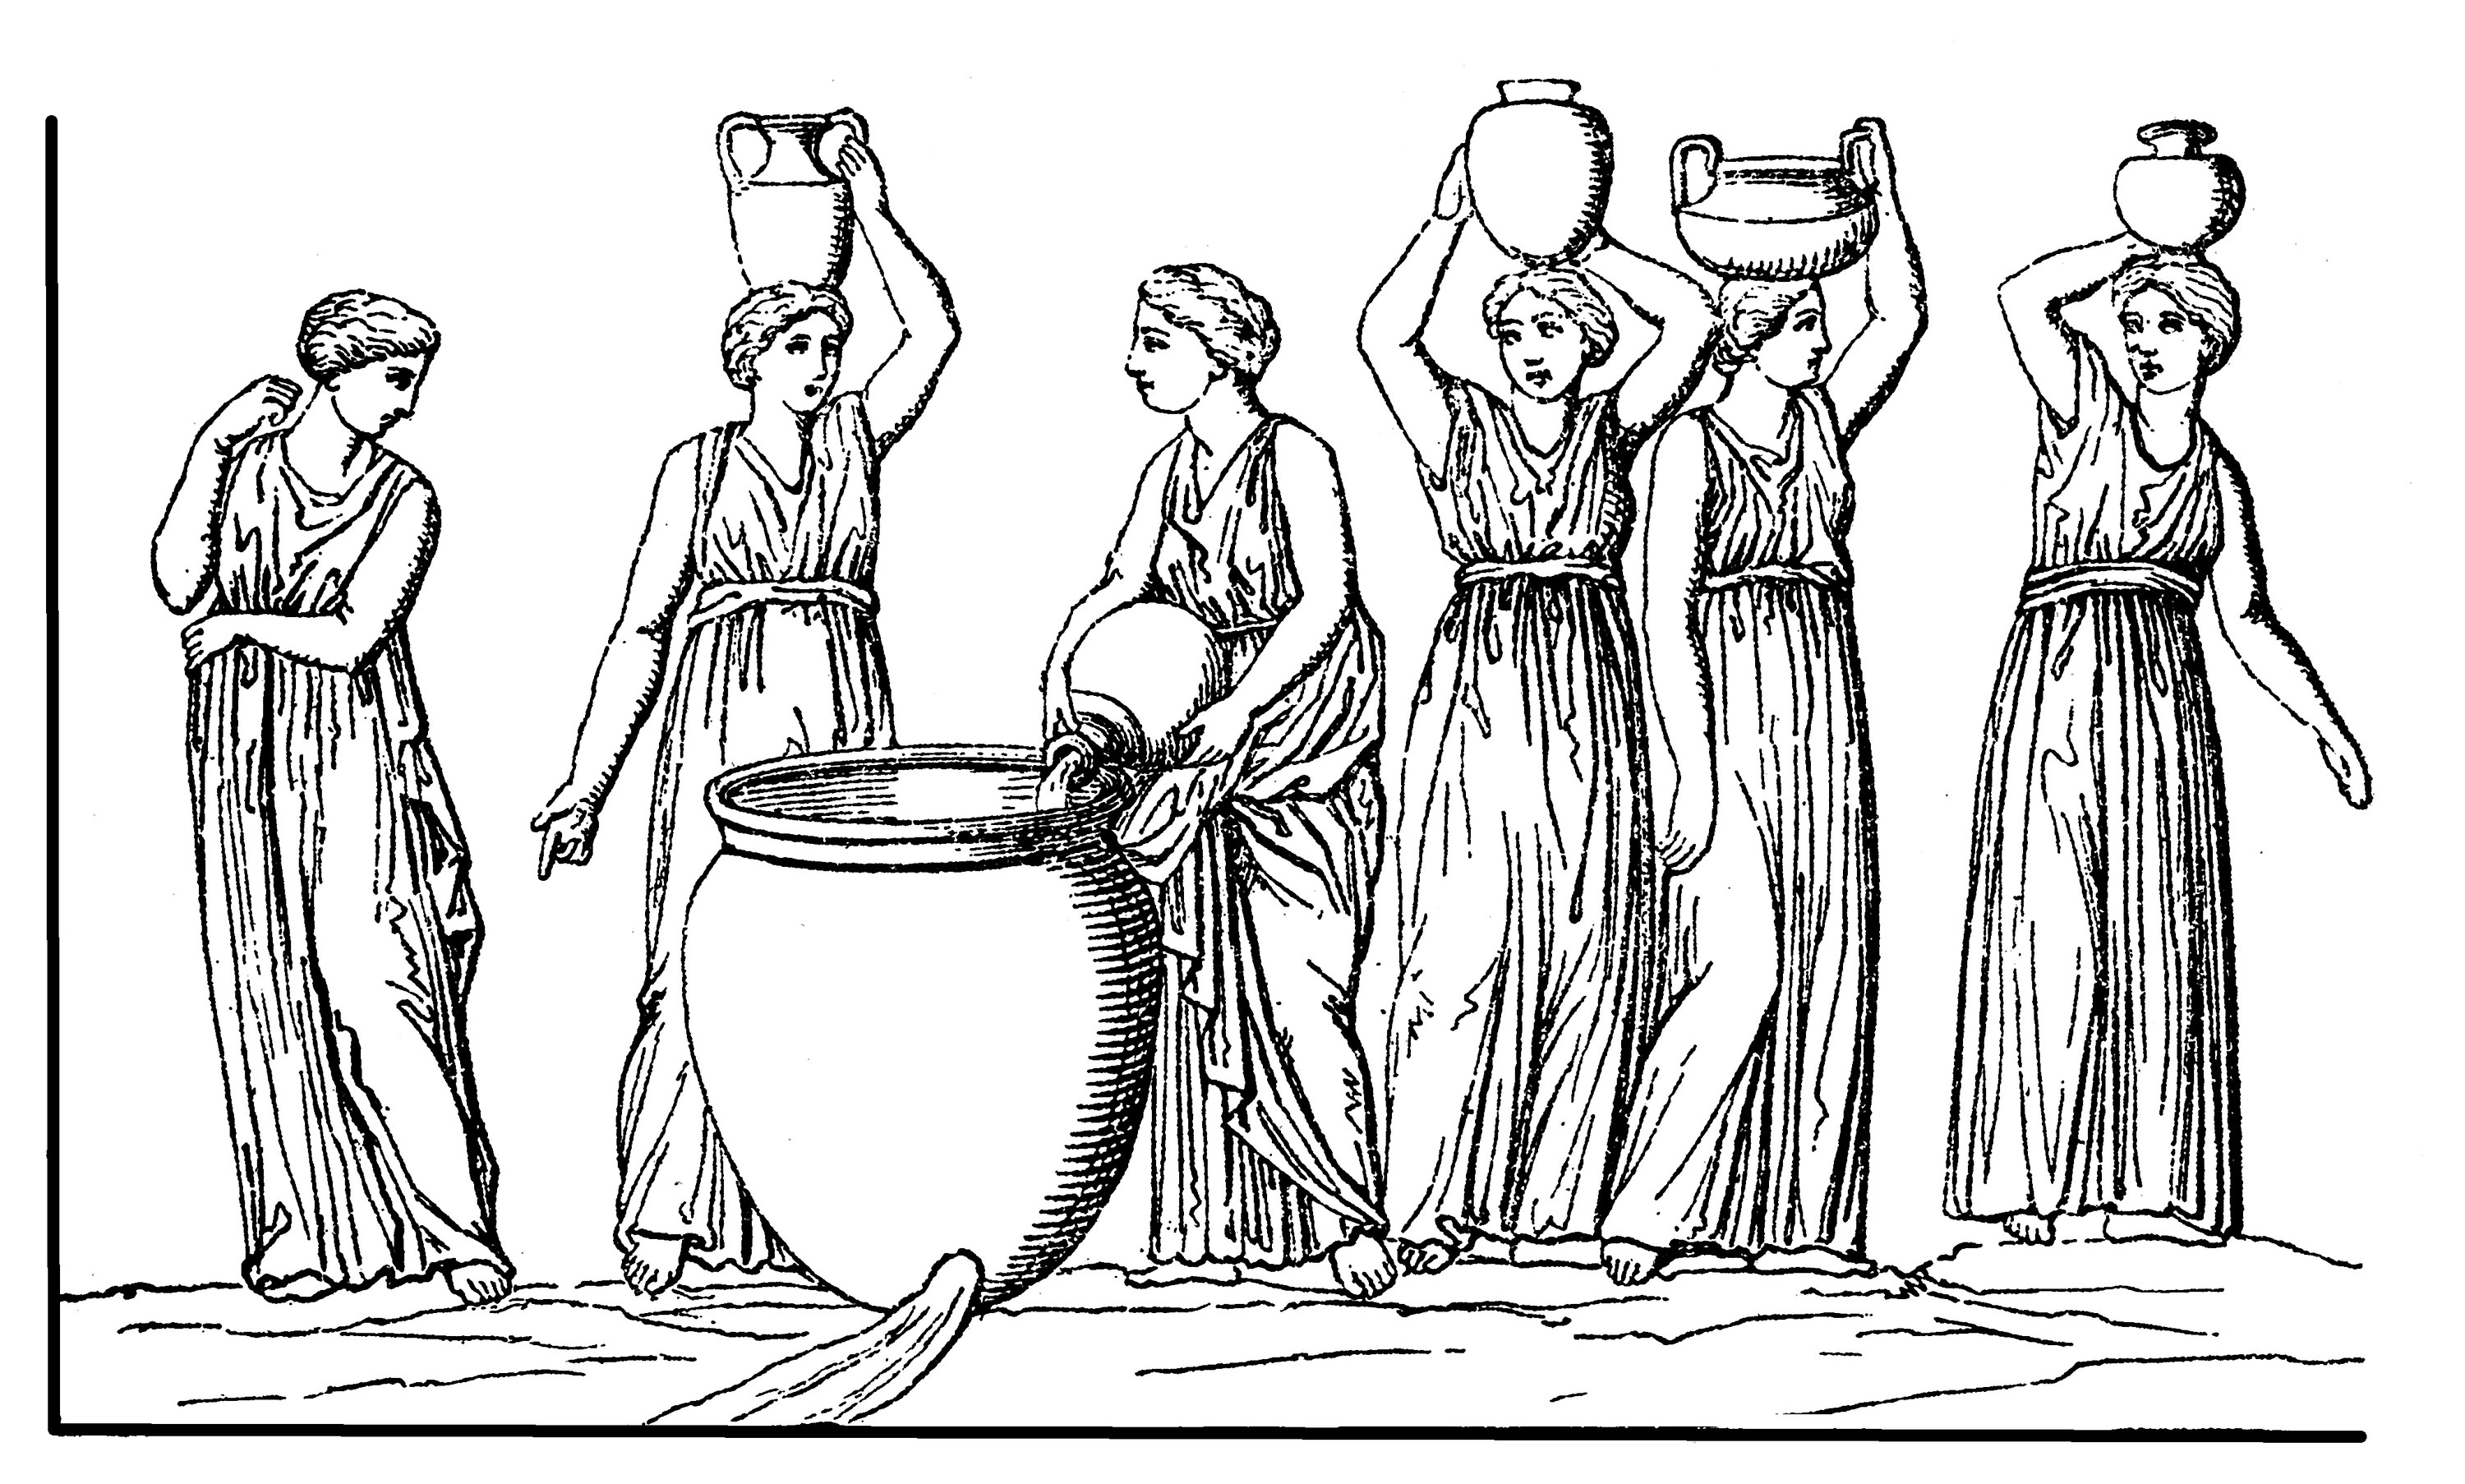 Six women in ancient Greek style dresses, four balancing pots on their heads, one pouring liquid into a larger pot on the ground